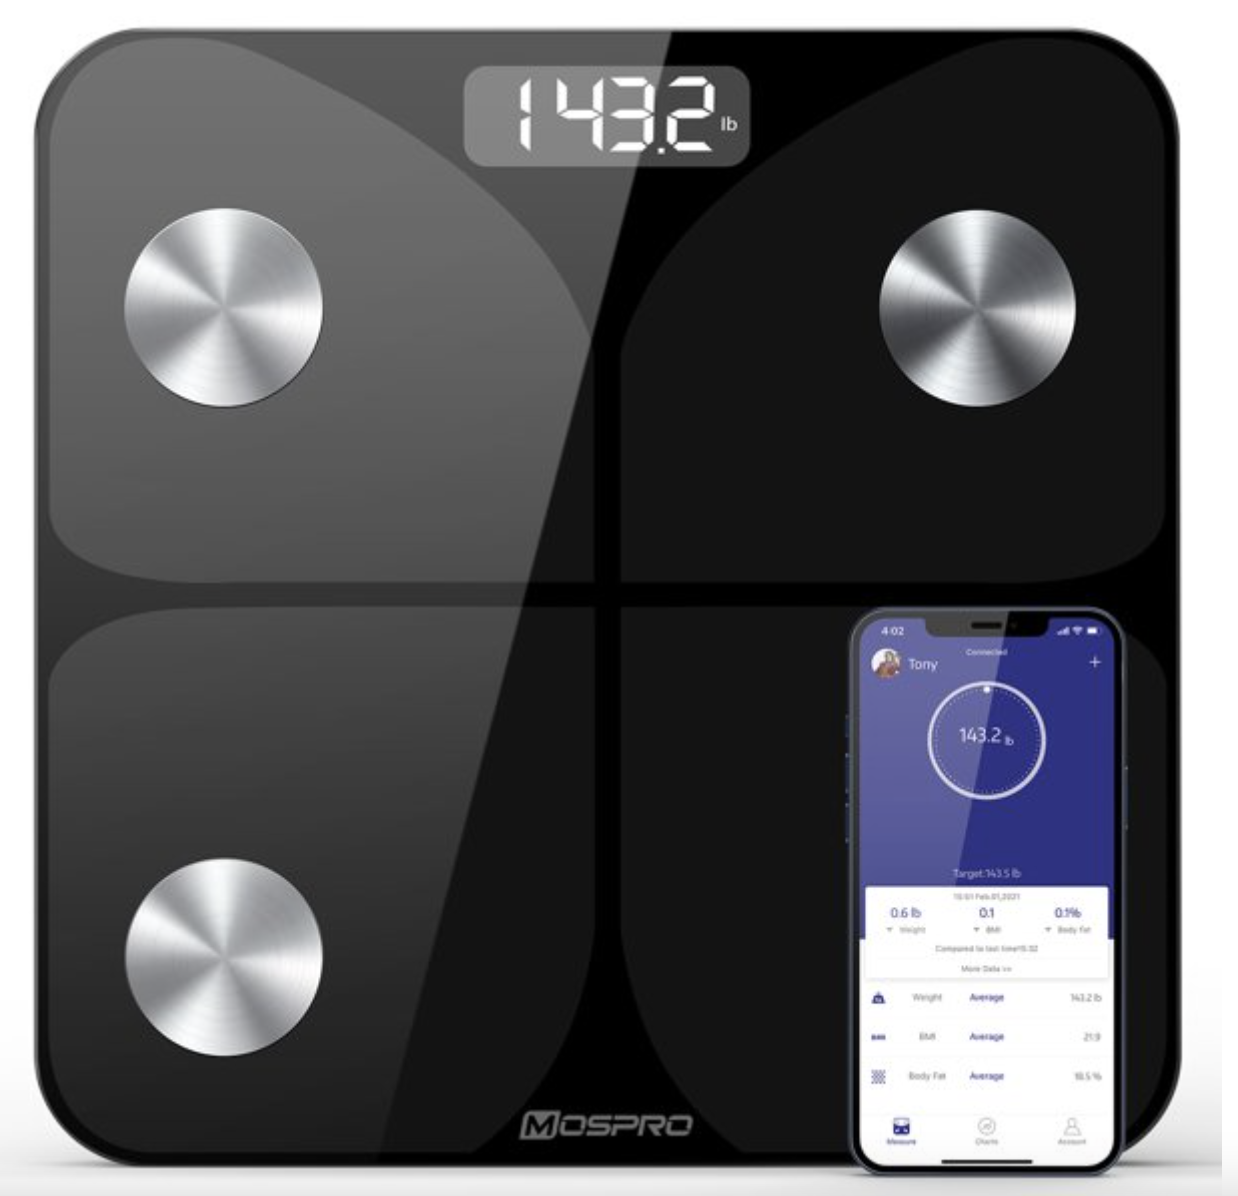 MOSPRO Smart Tracking Body Fat Weight Monitor